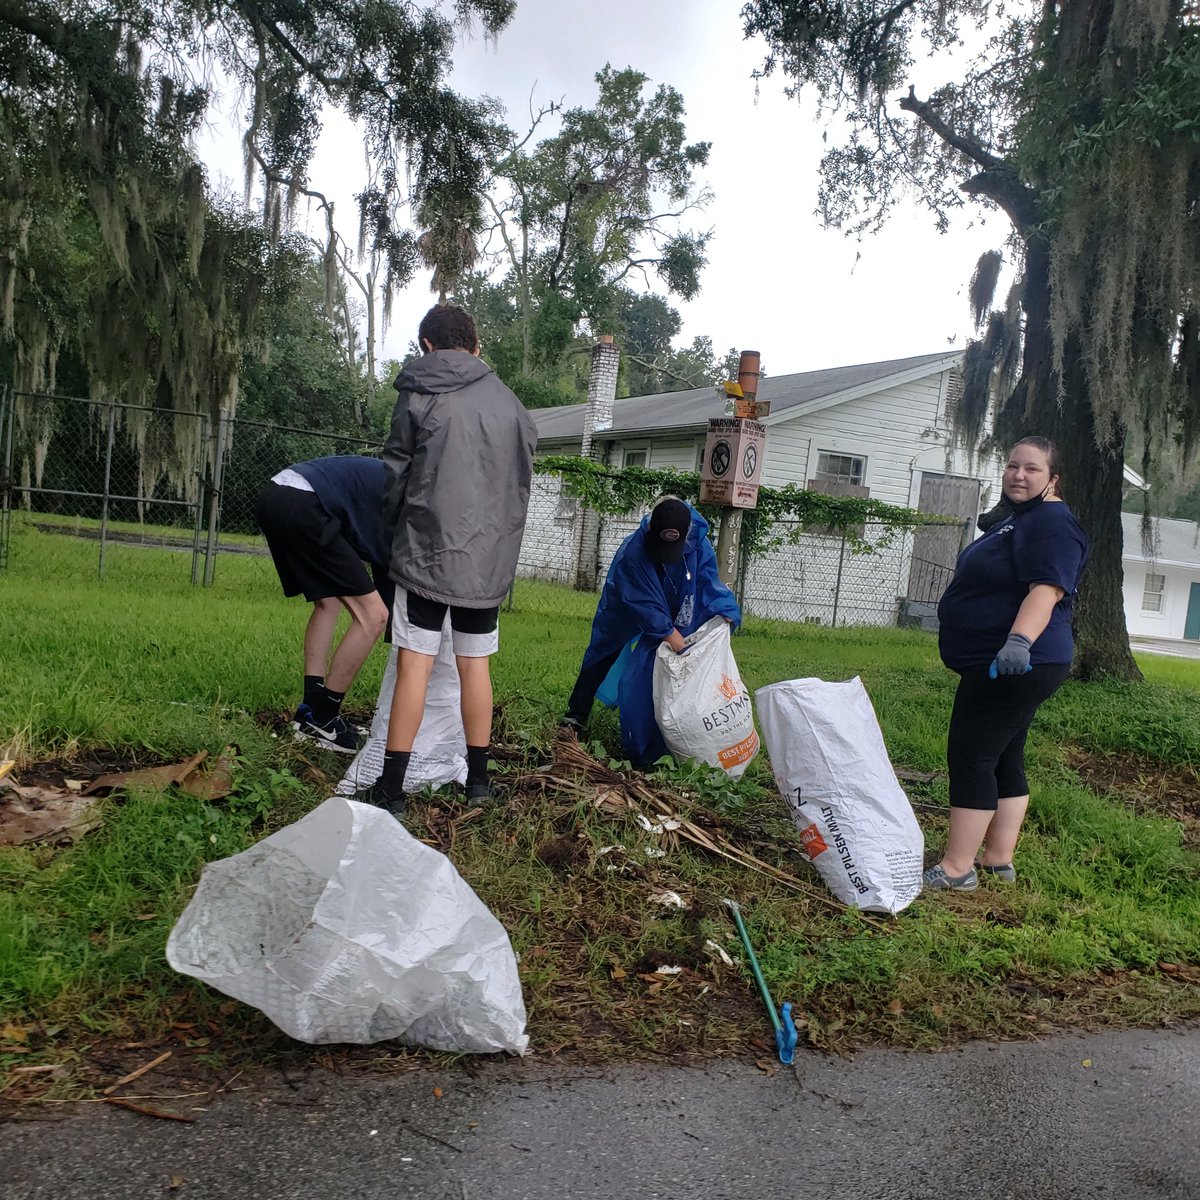 I went to support 2 clean ups today at Hogans Creek & McCoys Creek for #nationalcleanupday / #internationalcoastalcleanup 

Shout out to @keepjaxbeautiful, @groundworkjax @therisingtides & the amazing volunteers that collected 87 bags, a bike tire and multiple pieces of a boat!